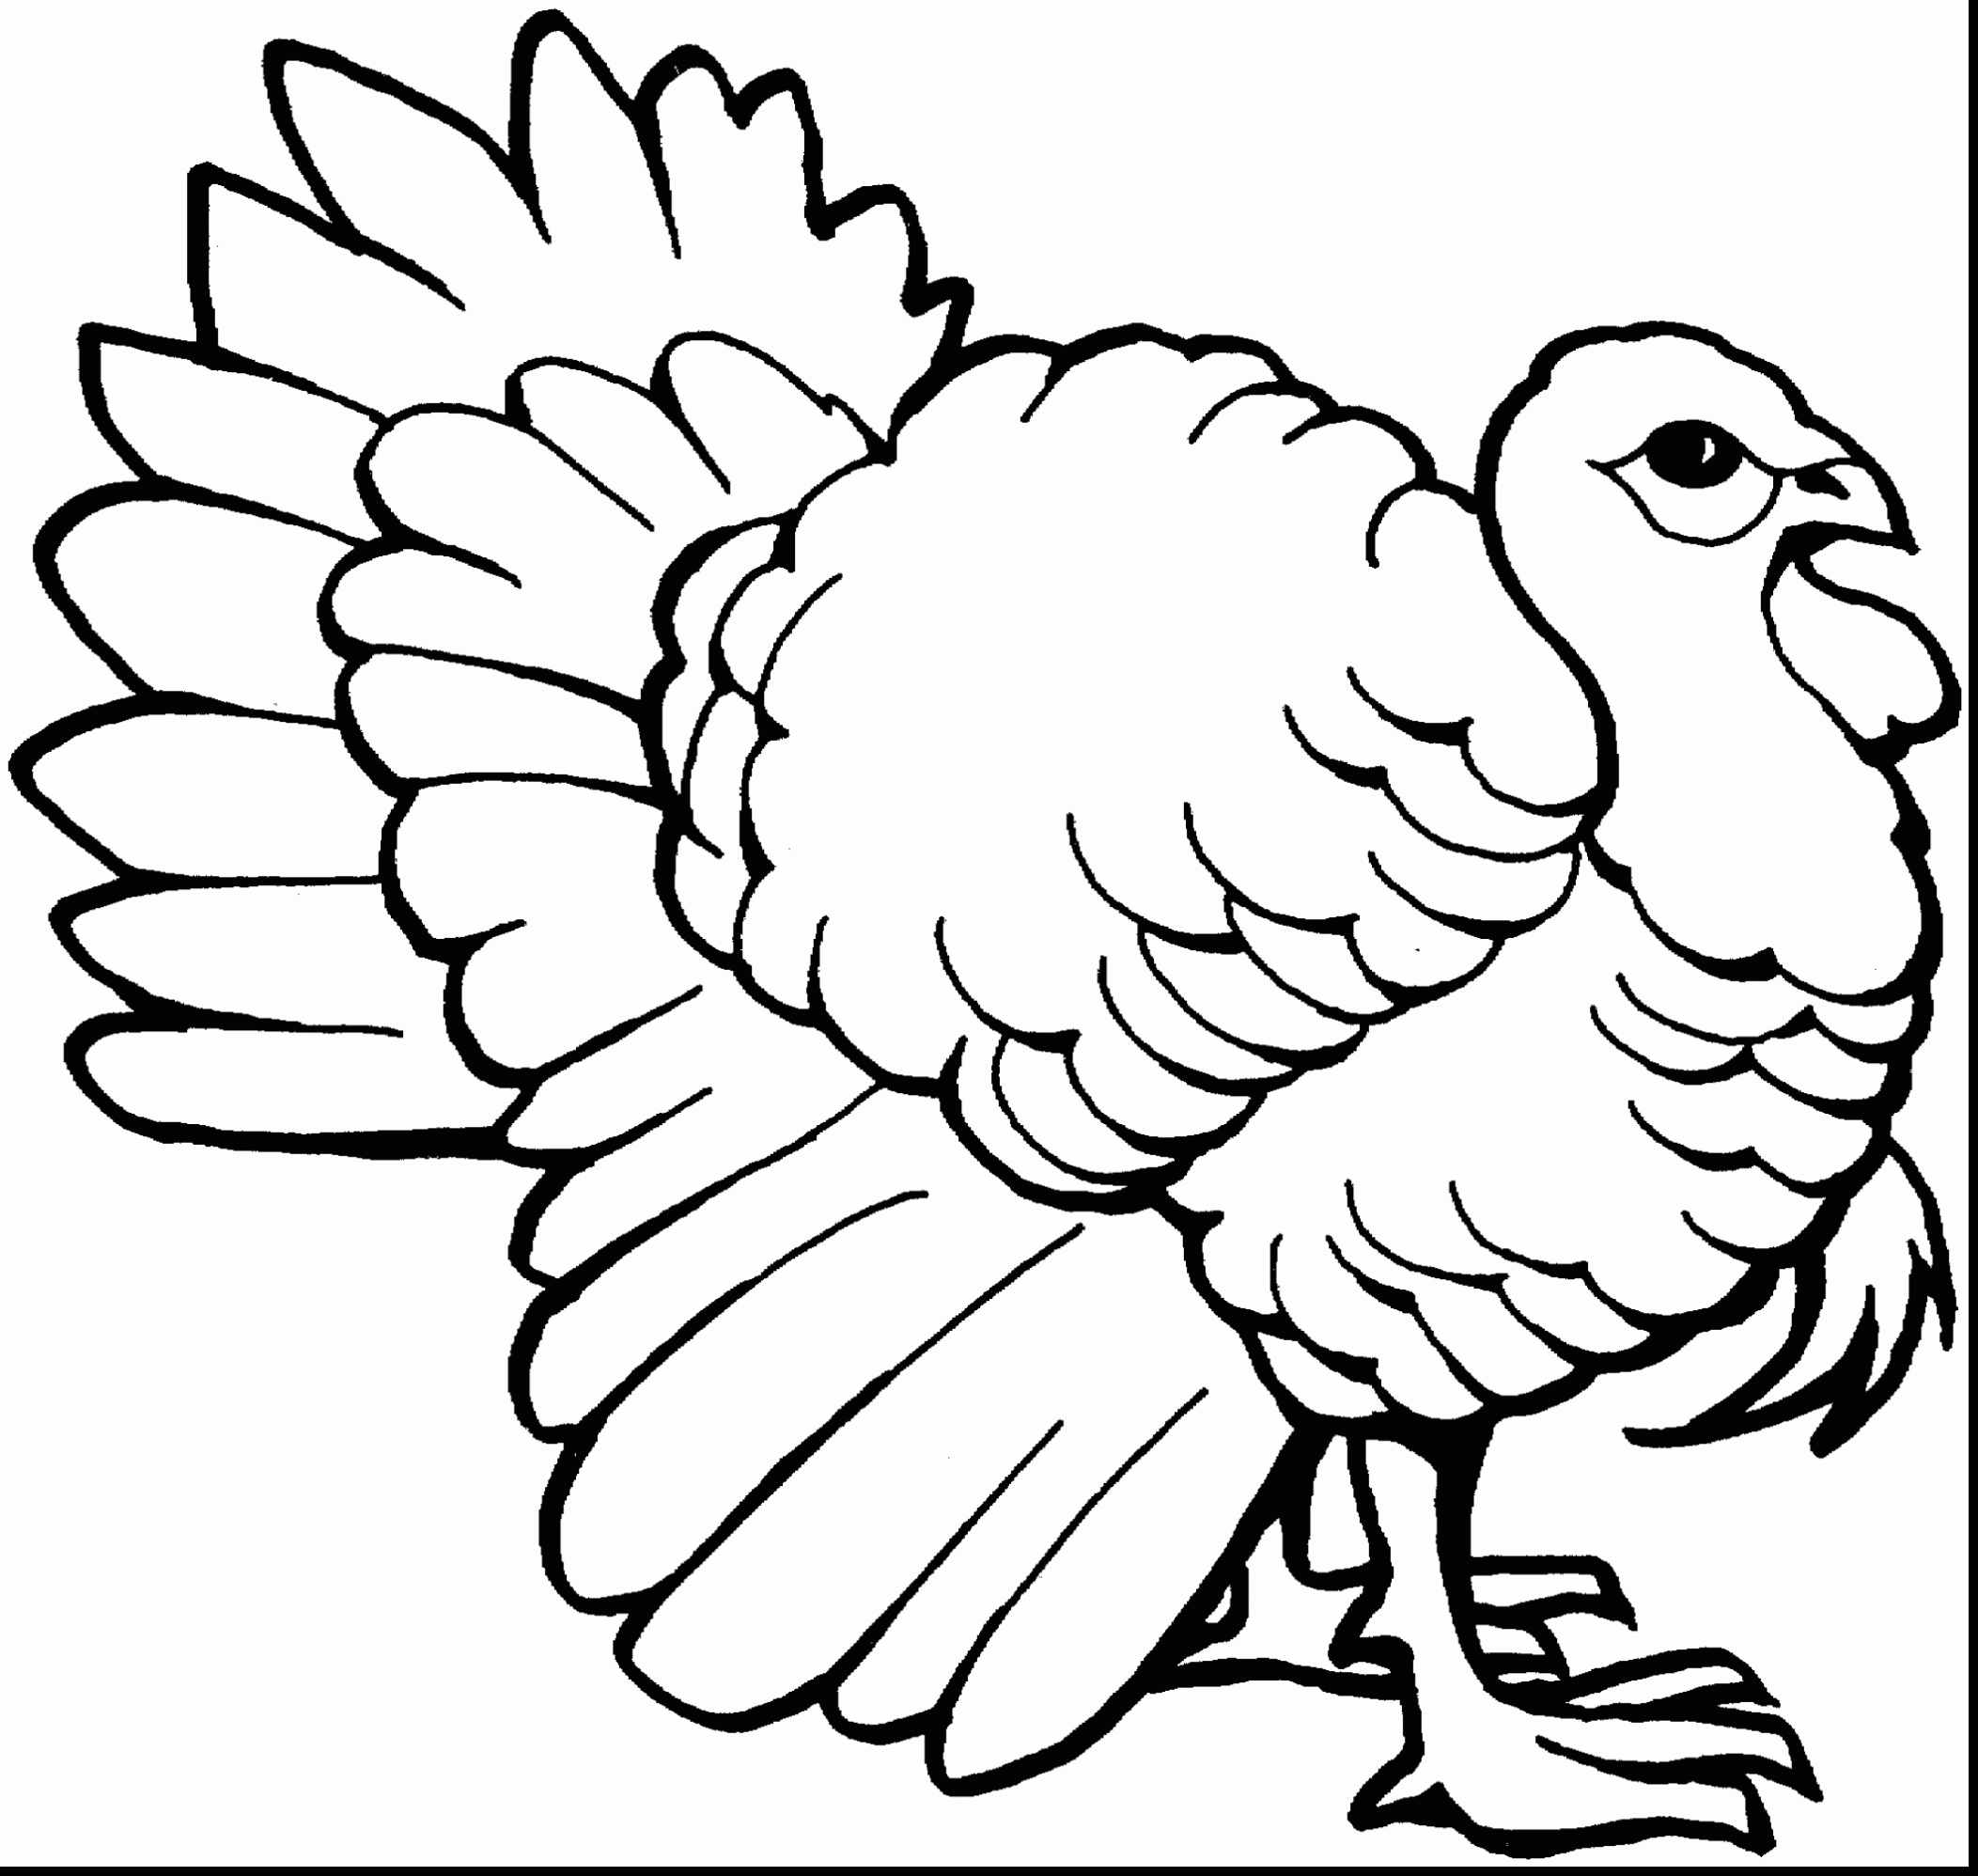 Preschool Turkey Coloring Pages Coloring Free Preschool Coloring Pages Fresh Turkey For